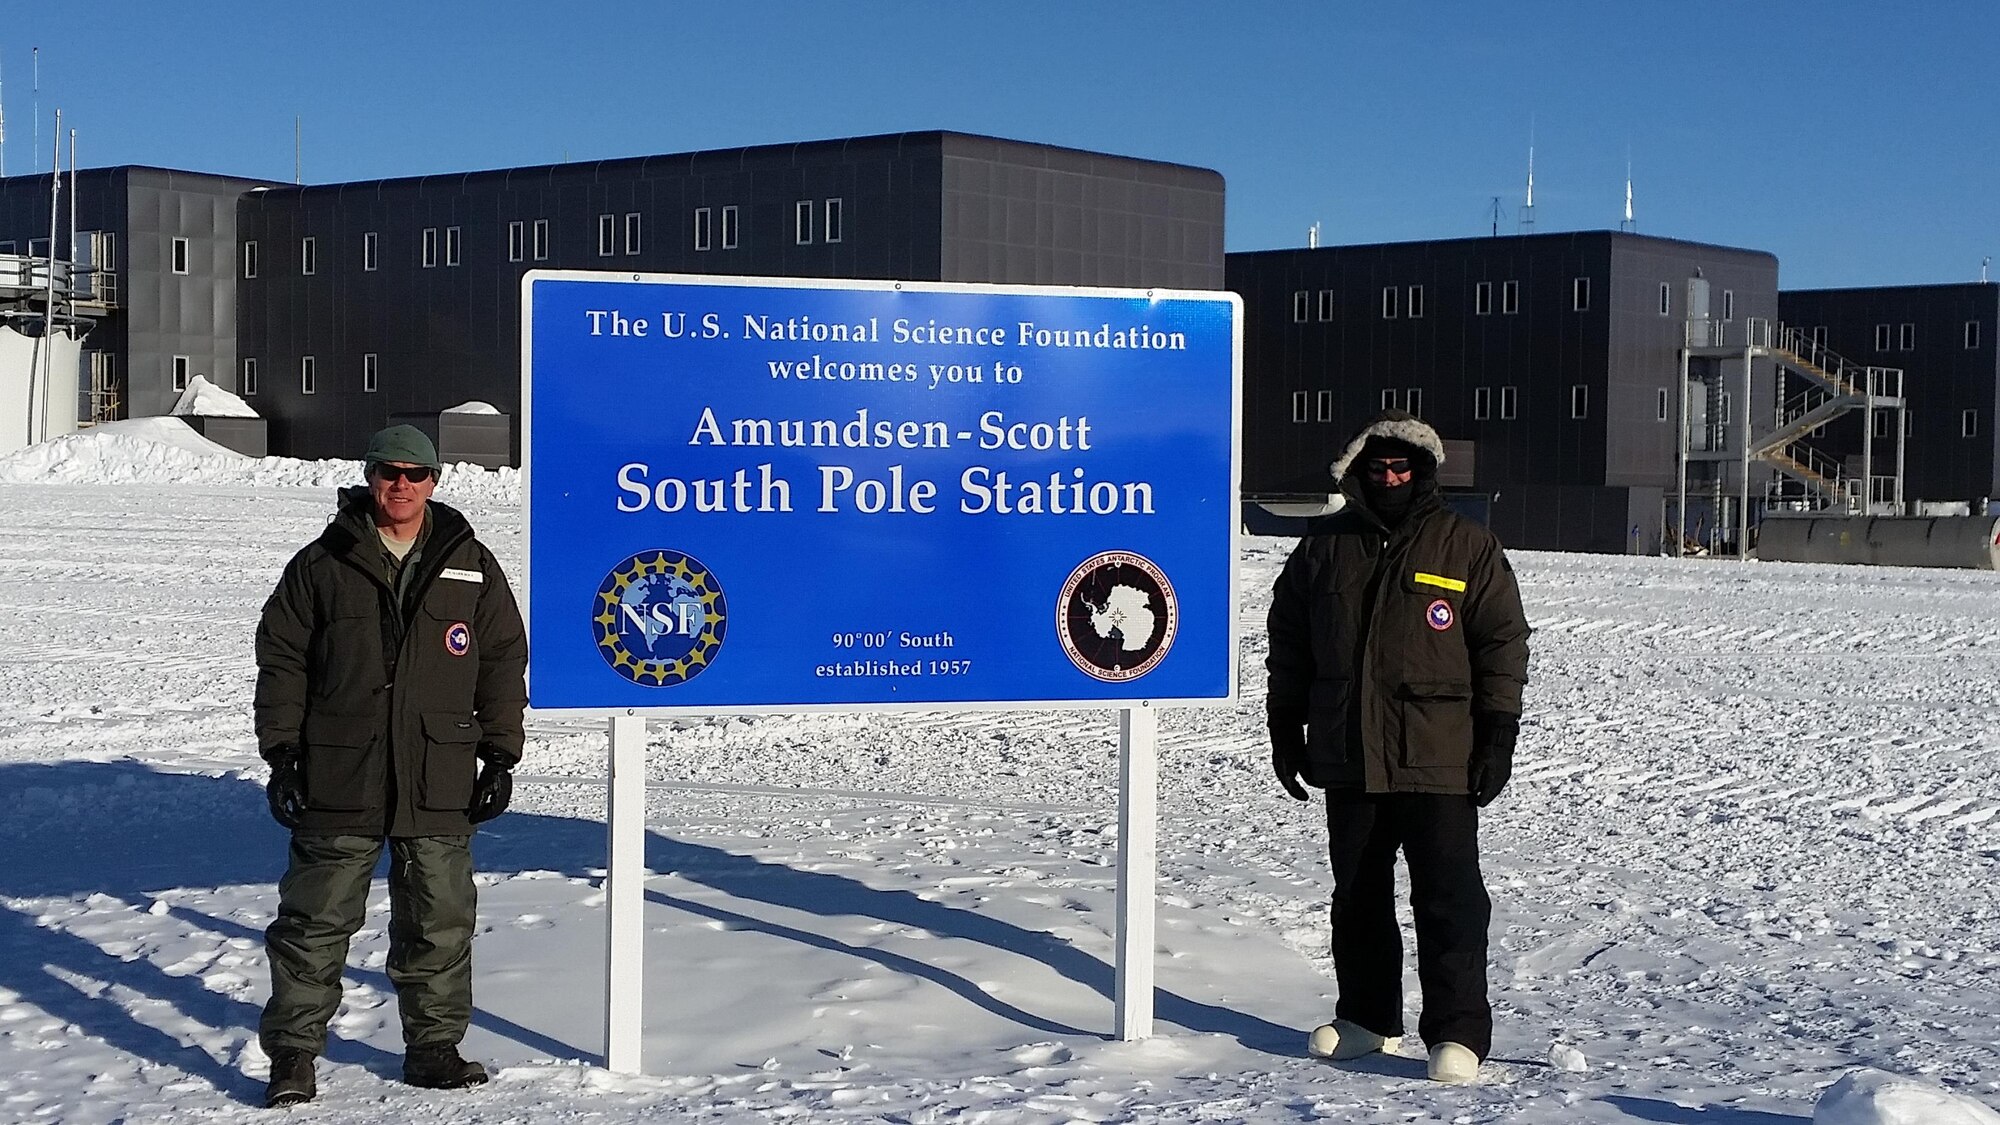 U.S. Air Force Brig. Gen. Dirk Smith, Joint Task Force - Support Forces Antarctica commander, and Col. Mark Doll, JTF-SFA deputy commander, visit forces at Amundsen-Scott South Pole Station, Feb. 11, 2016, during Operation DEEP FREEZE, the Department of Defense's support of the U.S. Antarctic Program and the National Science Foundation. This year marked the 60th Anniversary of the operation. (Courtesy photo)